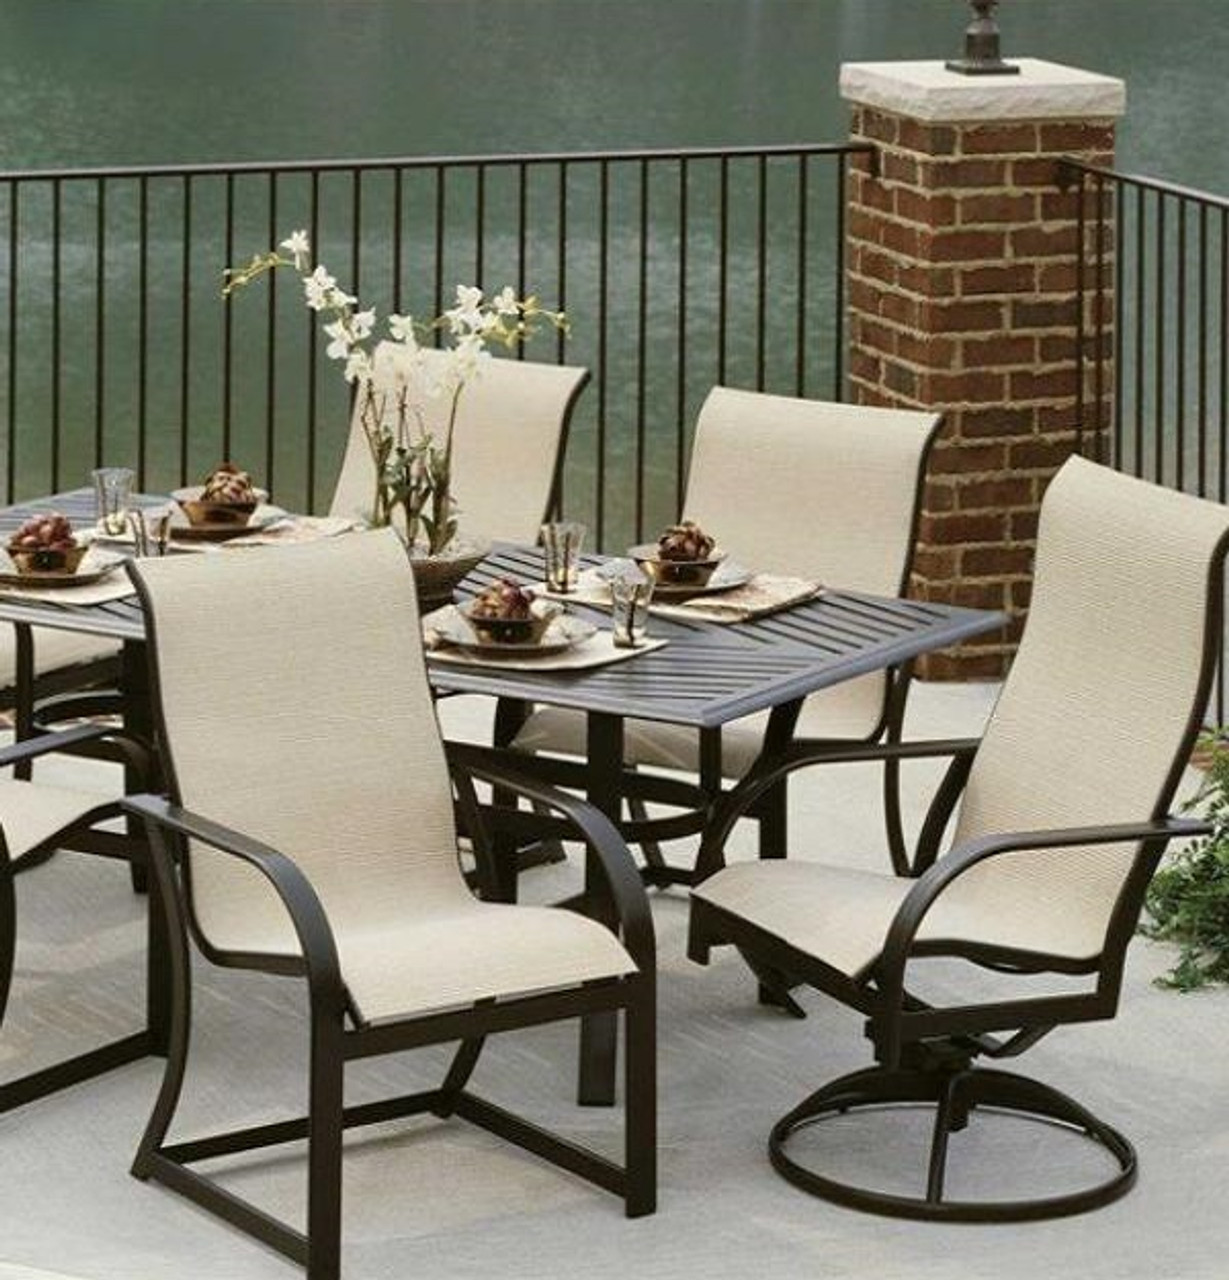 Key West Collection Featuring Sling Seating Winston Outdoor